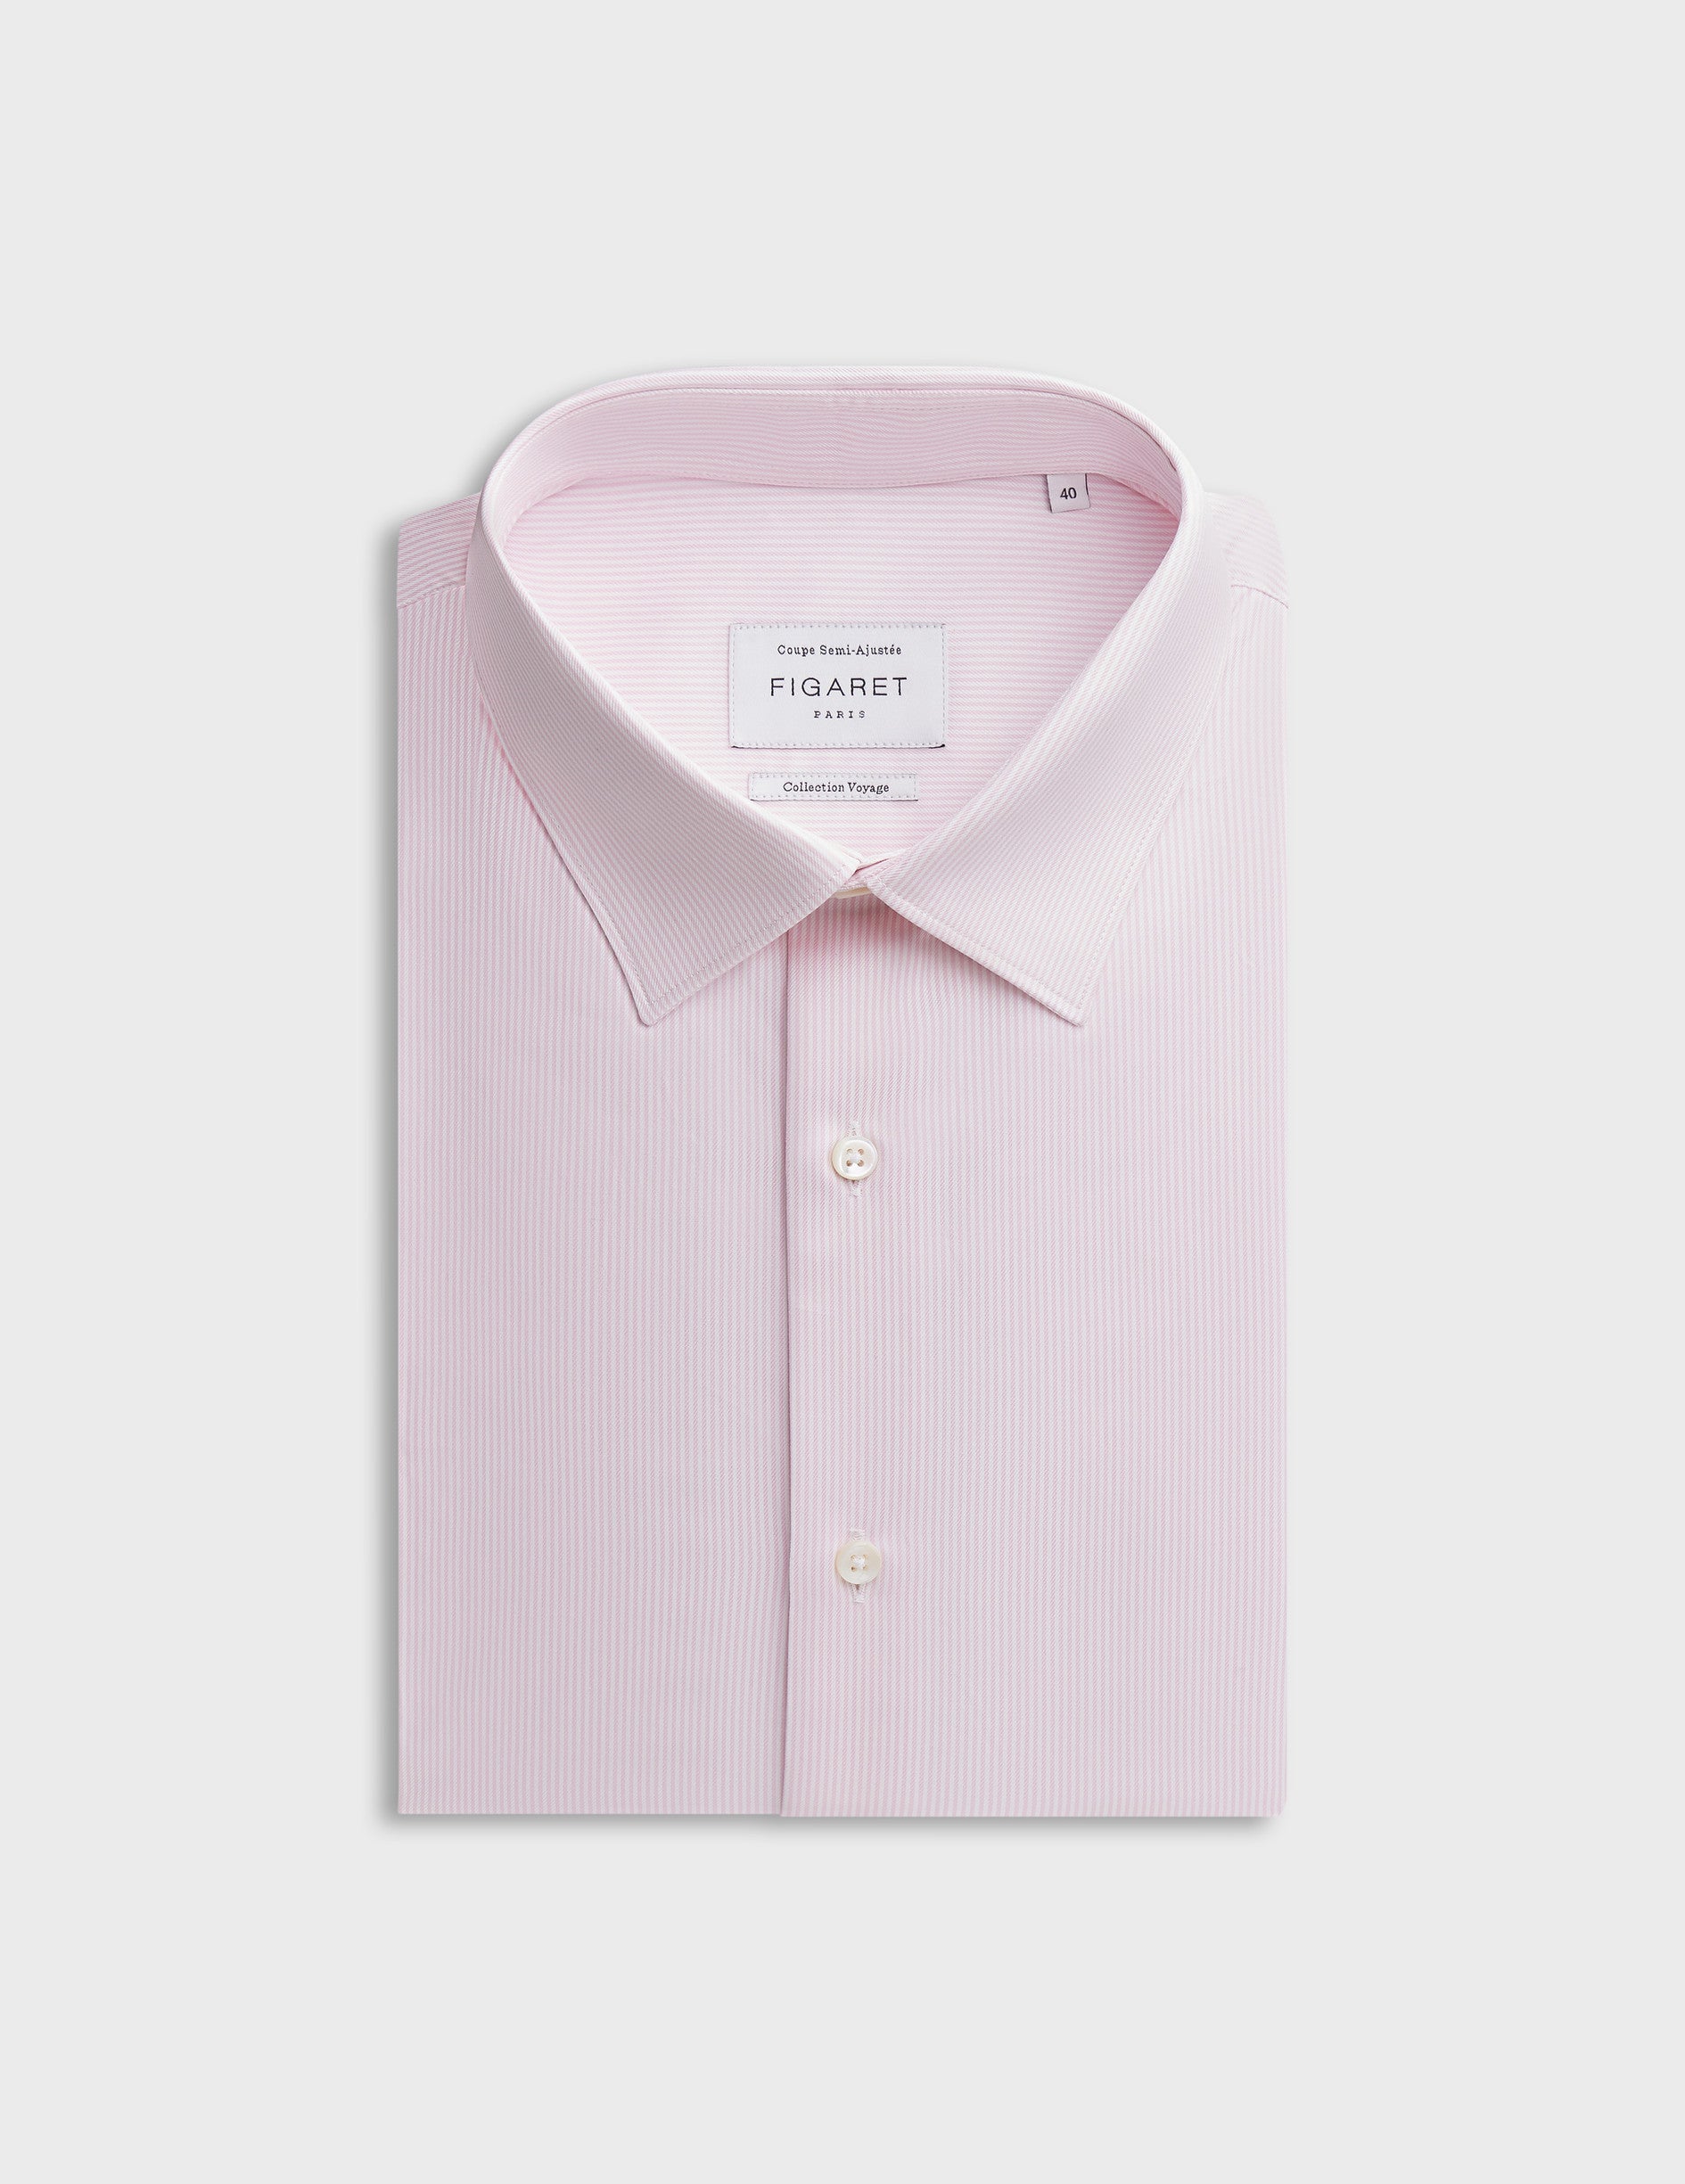 Semi-fitted light pink striped wrinkle-free shirt - Twill - Figaret Collar